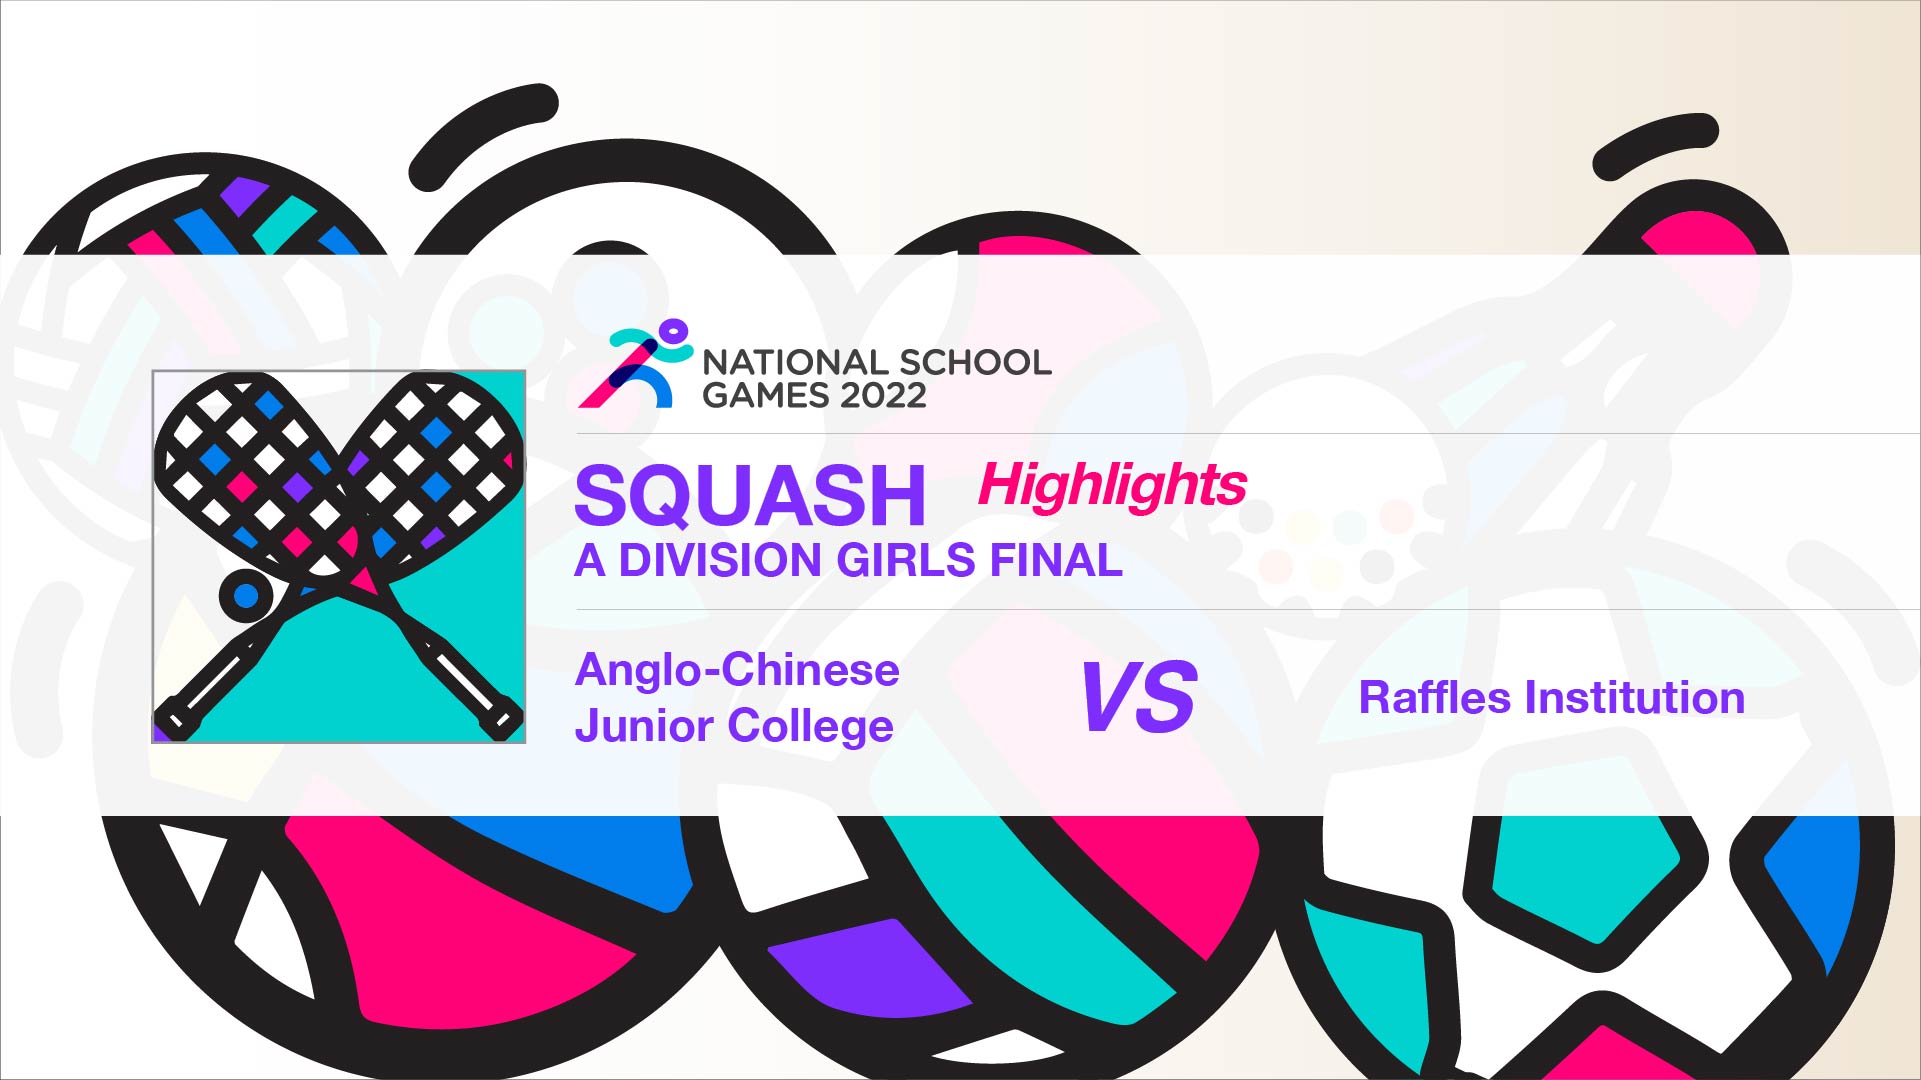 SSSC Squash A Division Girls Final | Anglo-Chinese Junior College vs Raffles Institution - Highlights